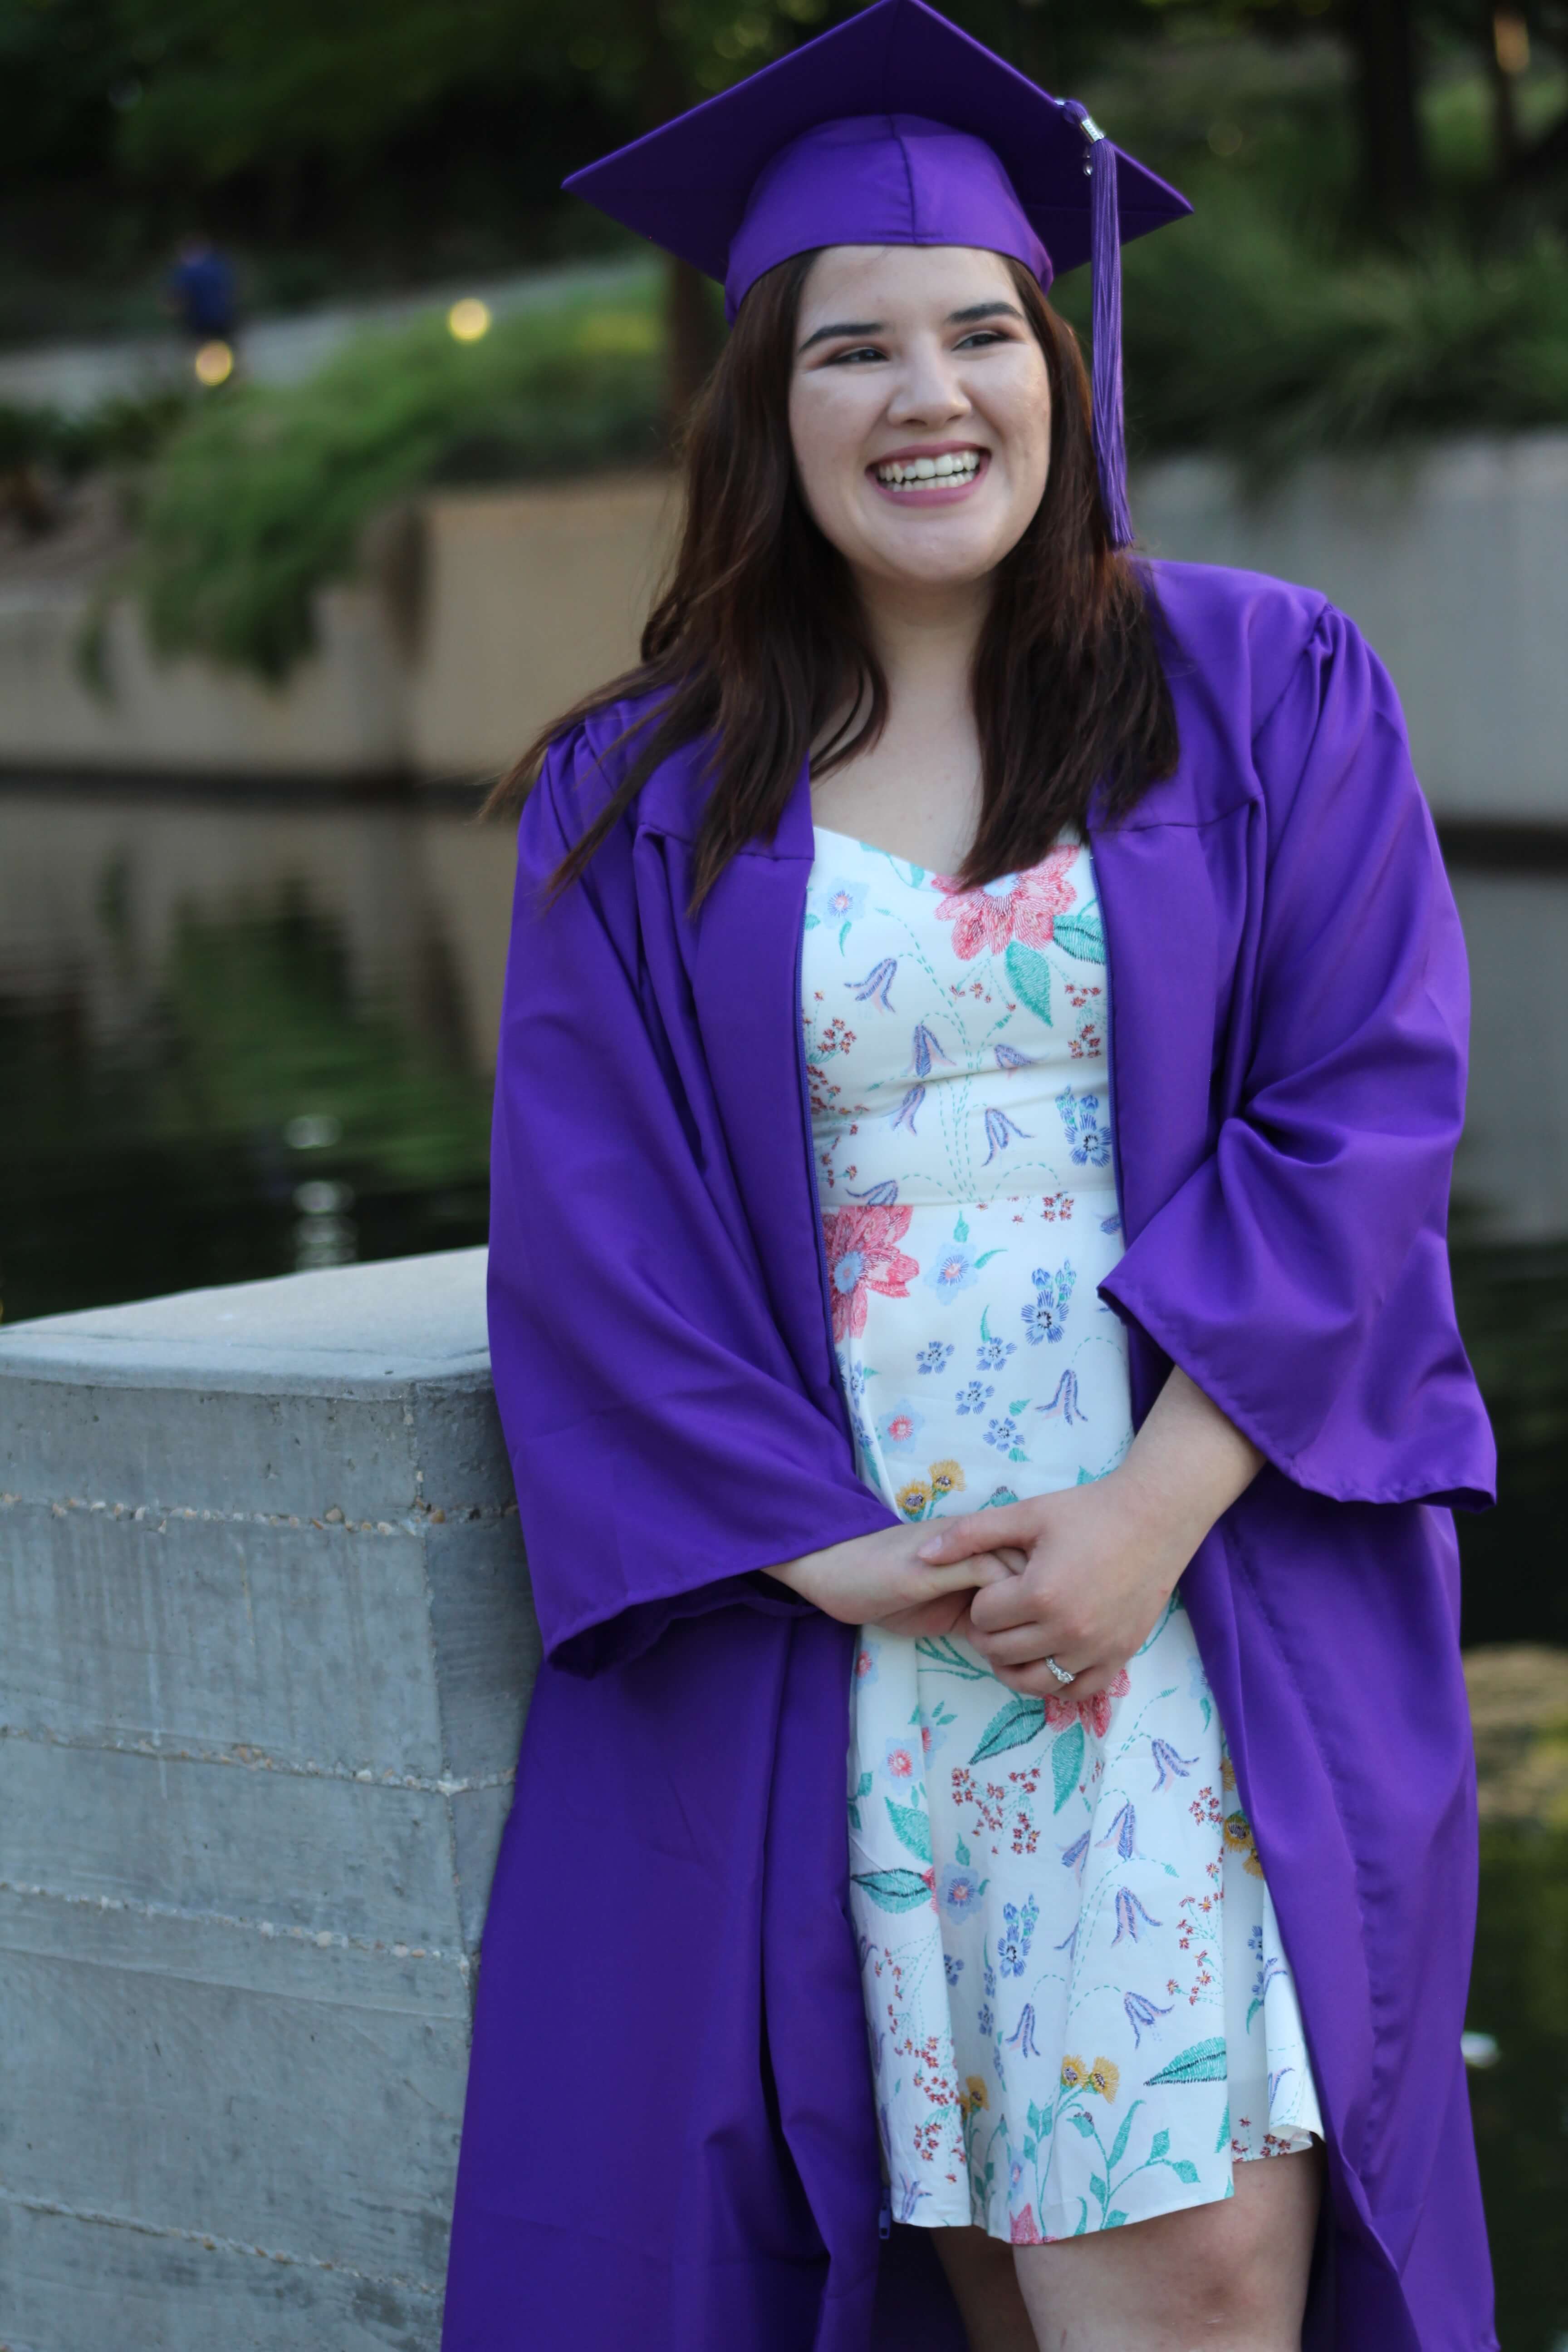 Vanessa Limon, a 2019 scholarship winner, wears a floral dress with a blue graduation gown and cap.